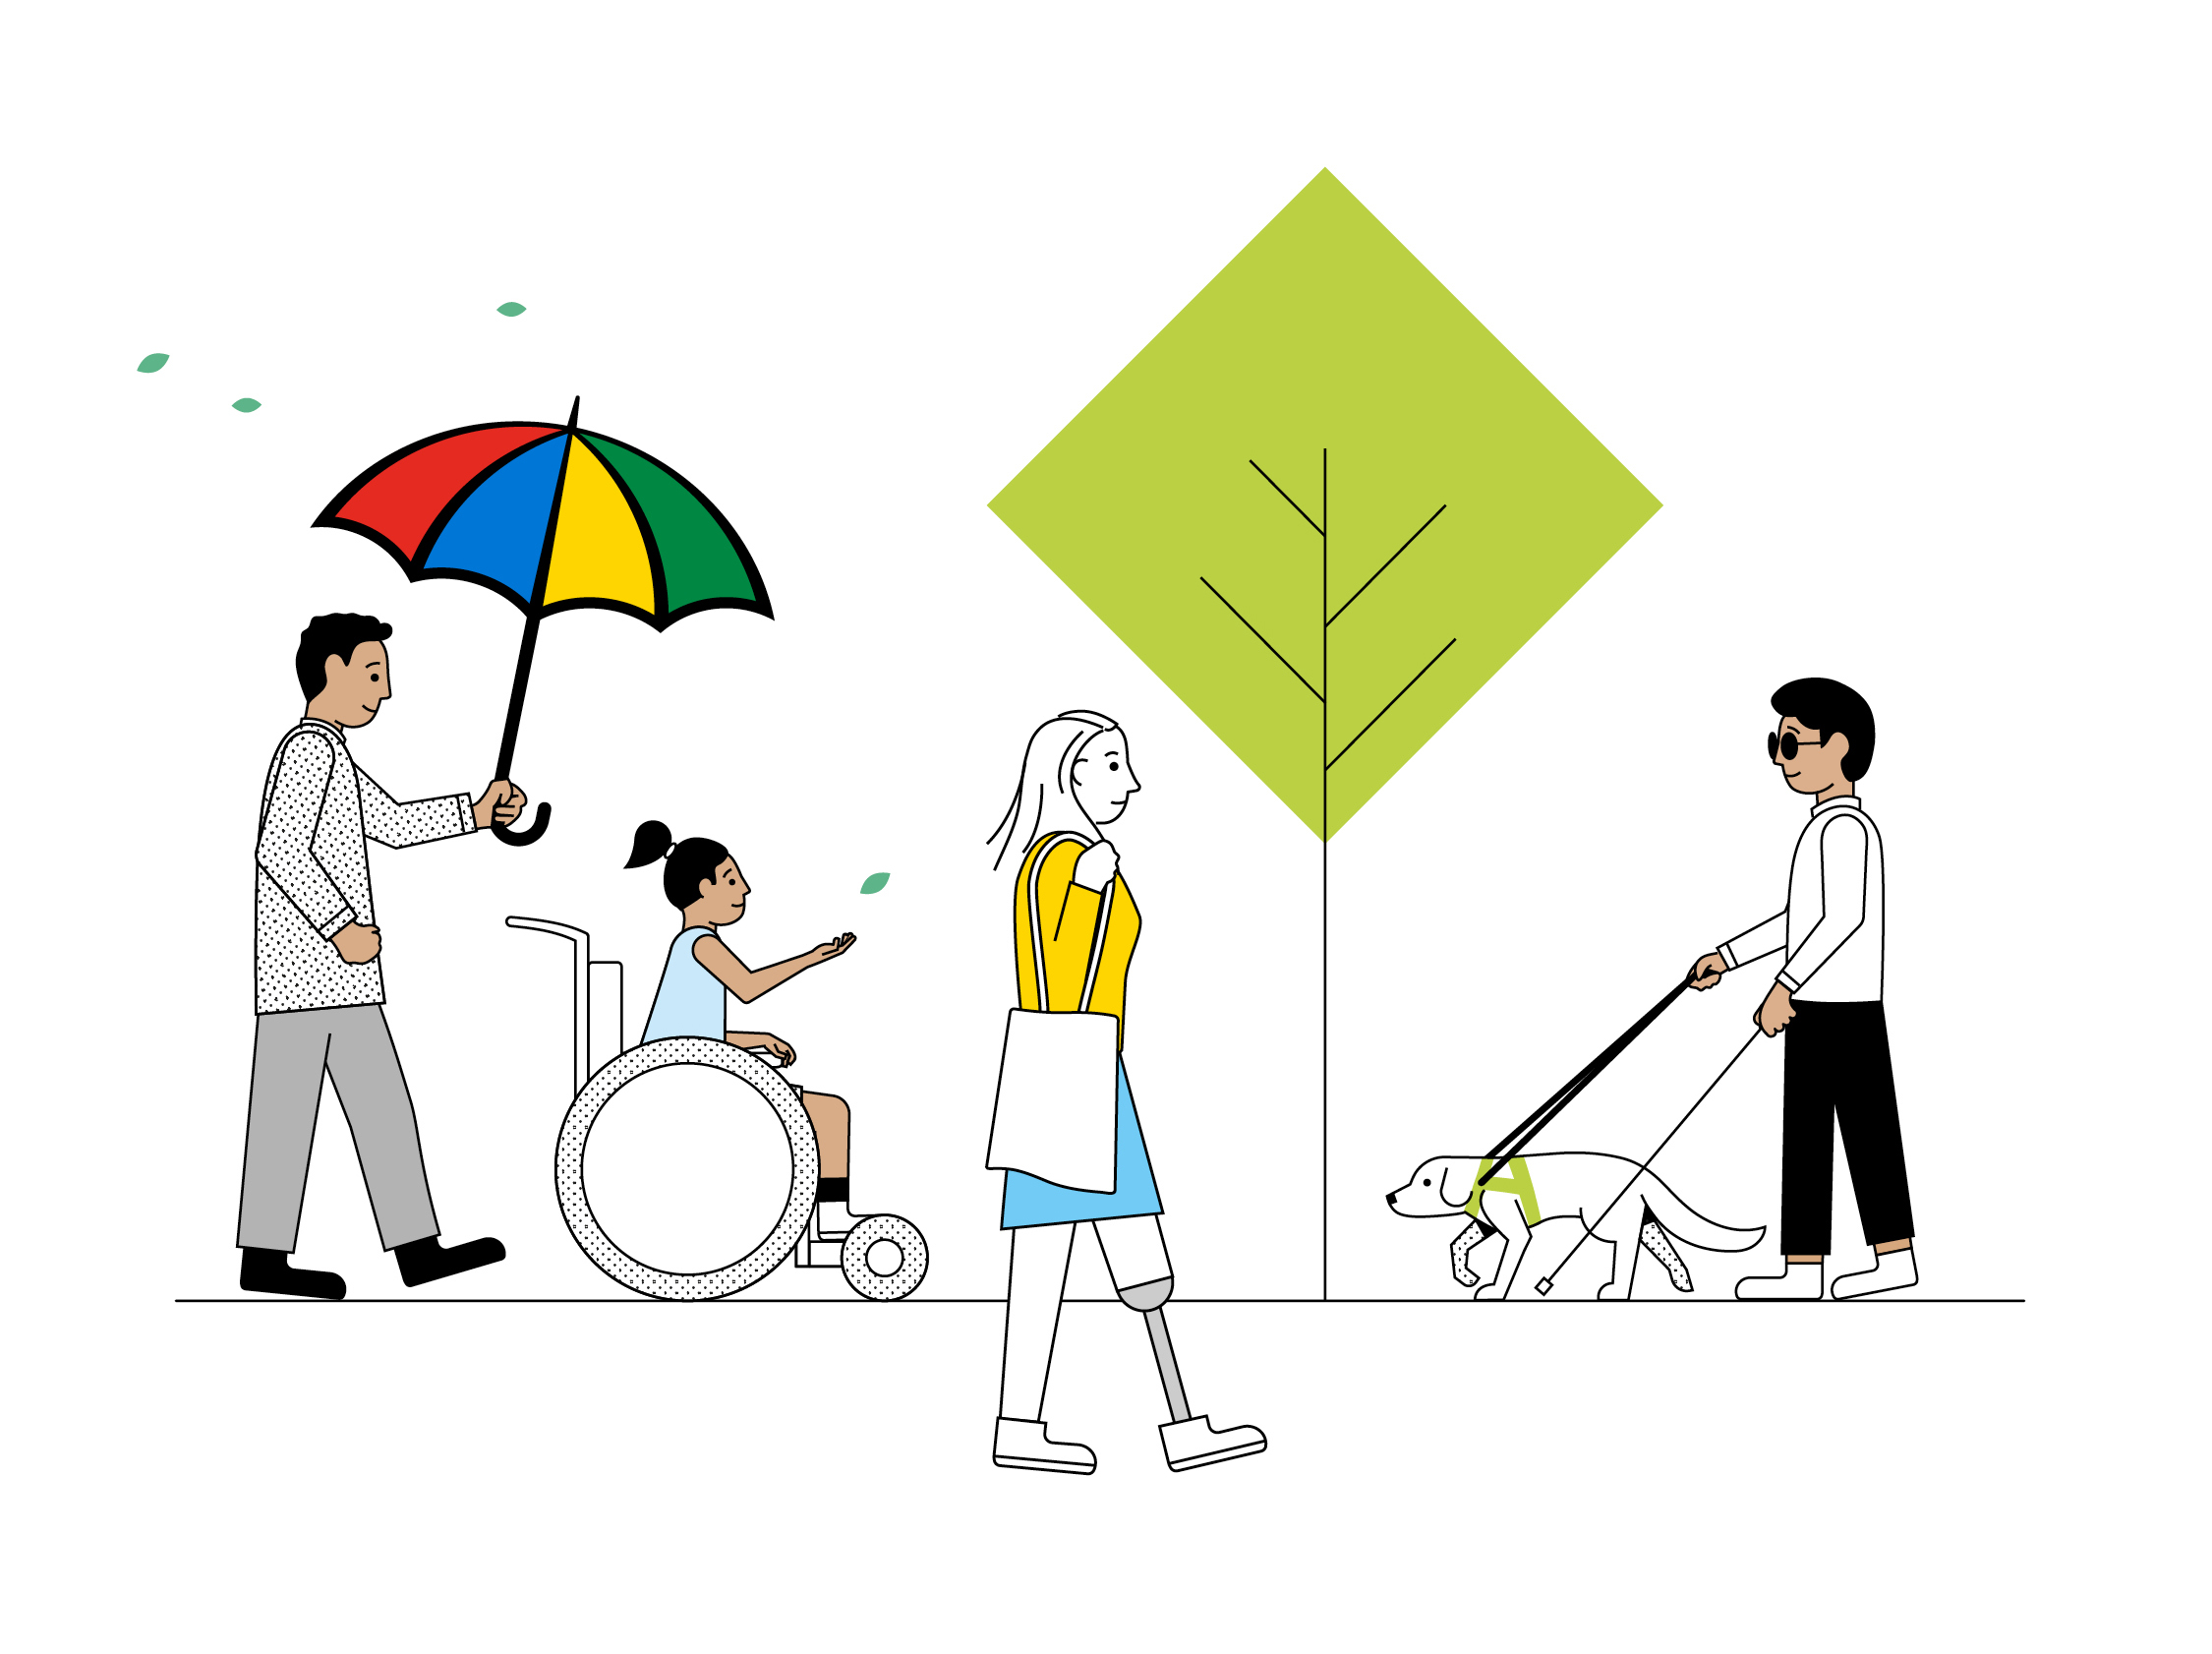 Illustration of person walking with rainbow umbrella, person in a wheelchair and someone with a guide dog